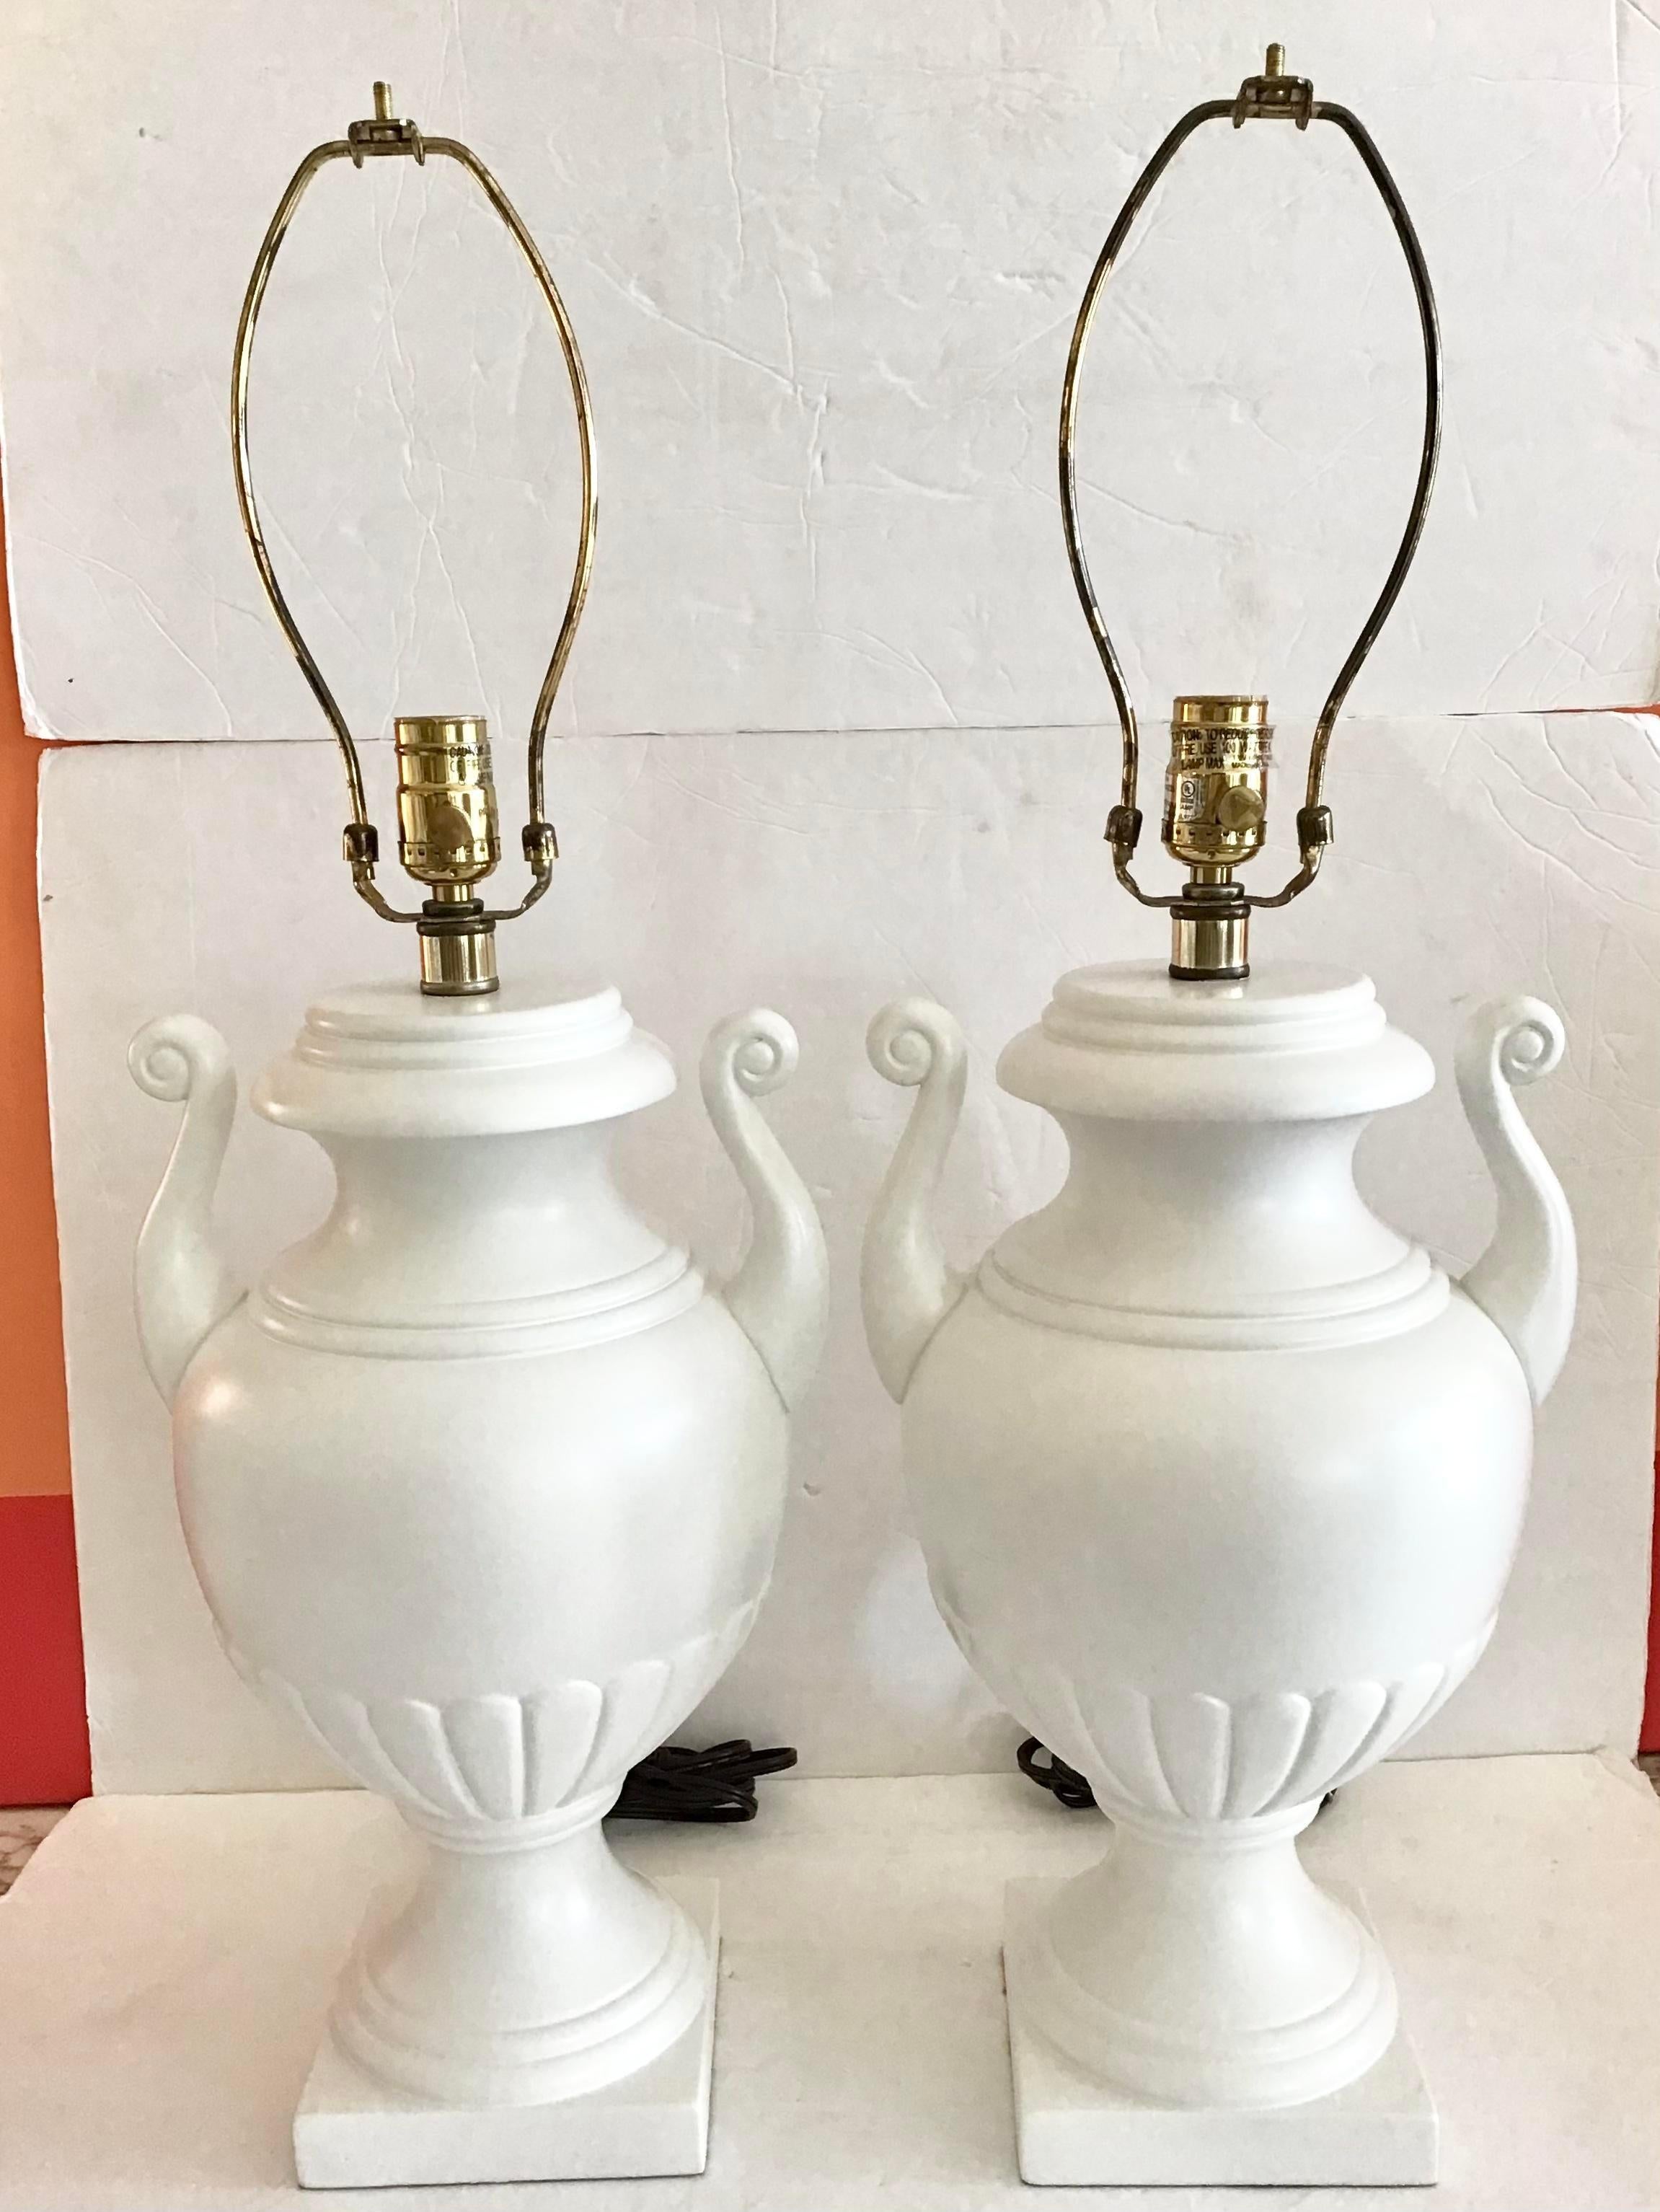 Pair of discontinued Todd Hase white urn ceramic table lamps lacquered in white. Nice neoclassical design. A classic. Just add finials and shades of your choice.